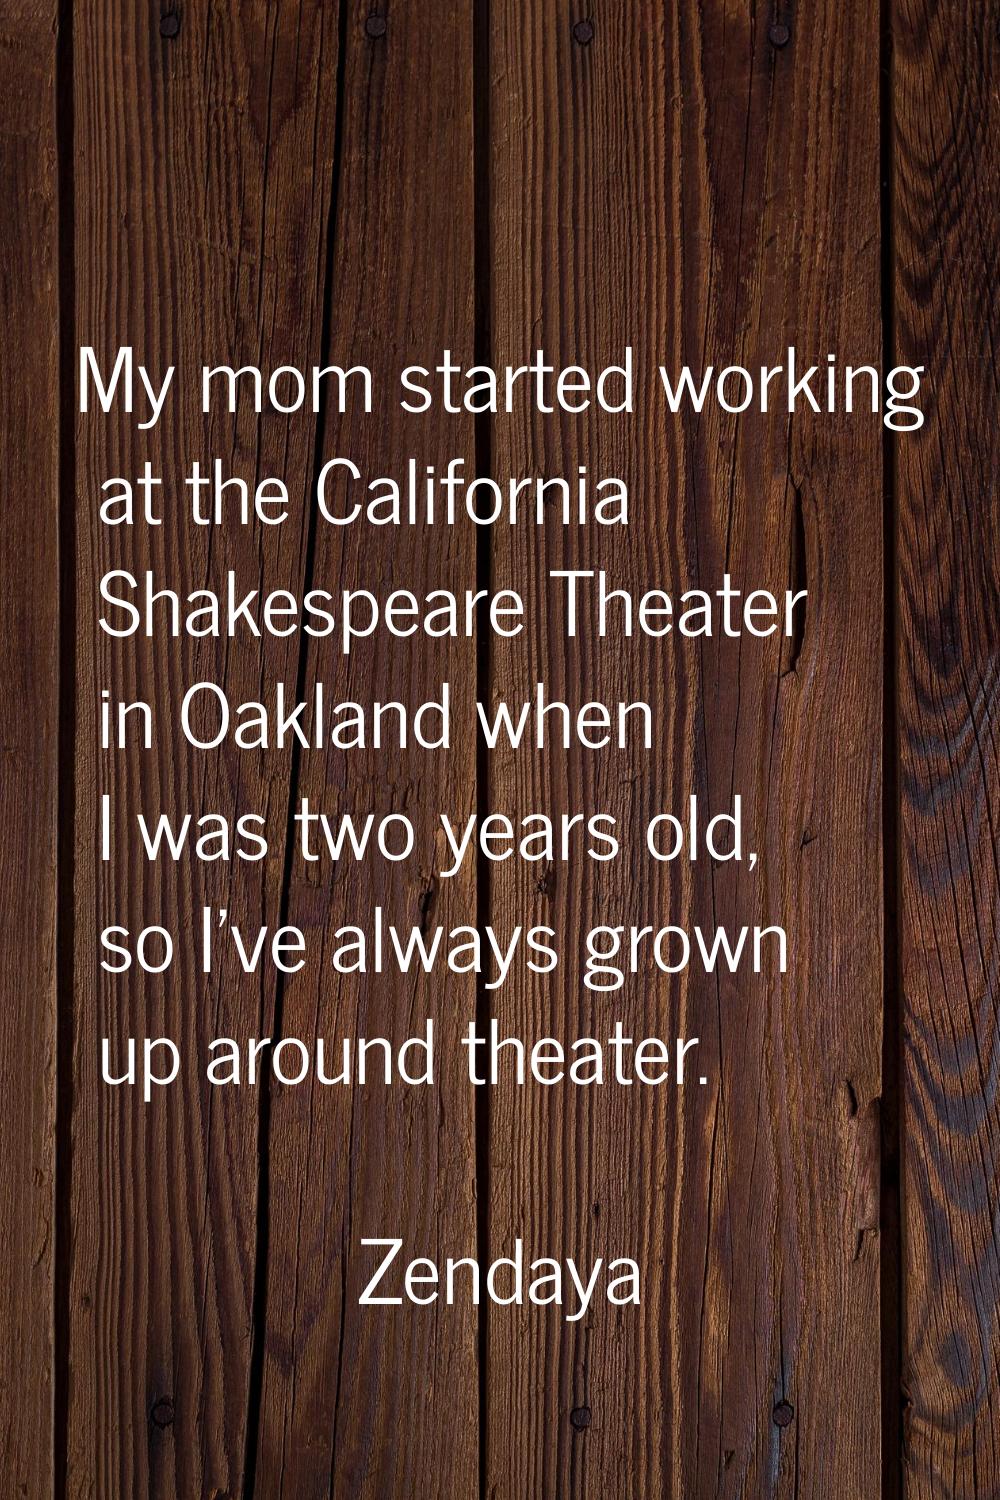 My mom started working at the California Shakespeare Theater in Oakland when I was two years old, s